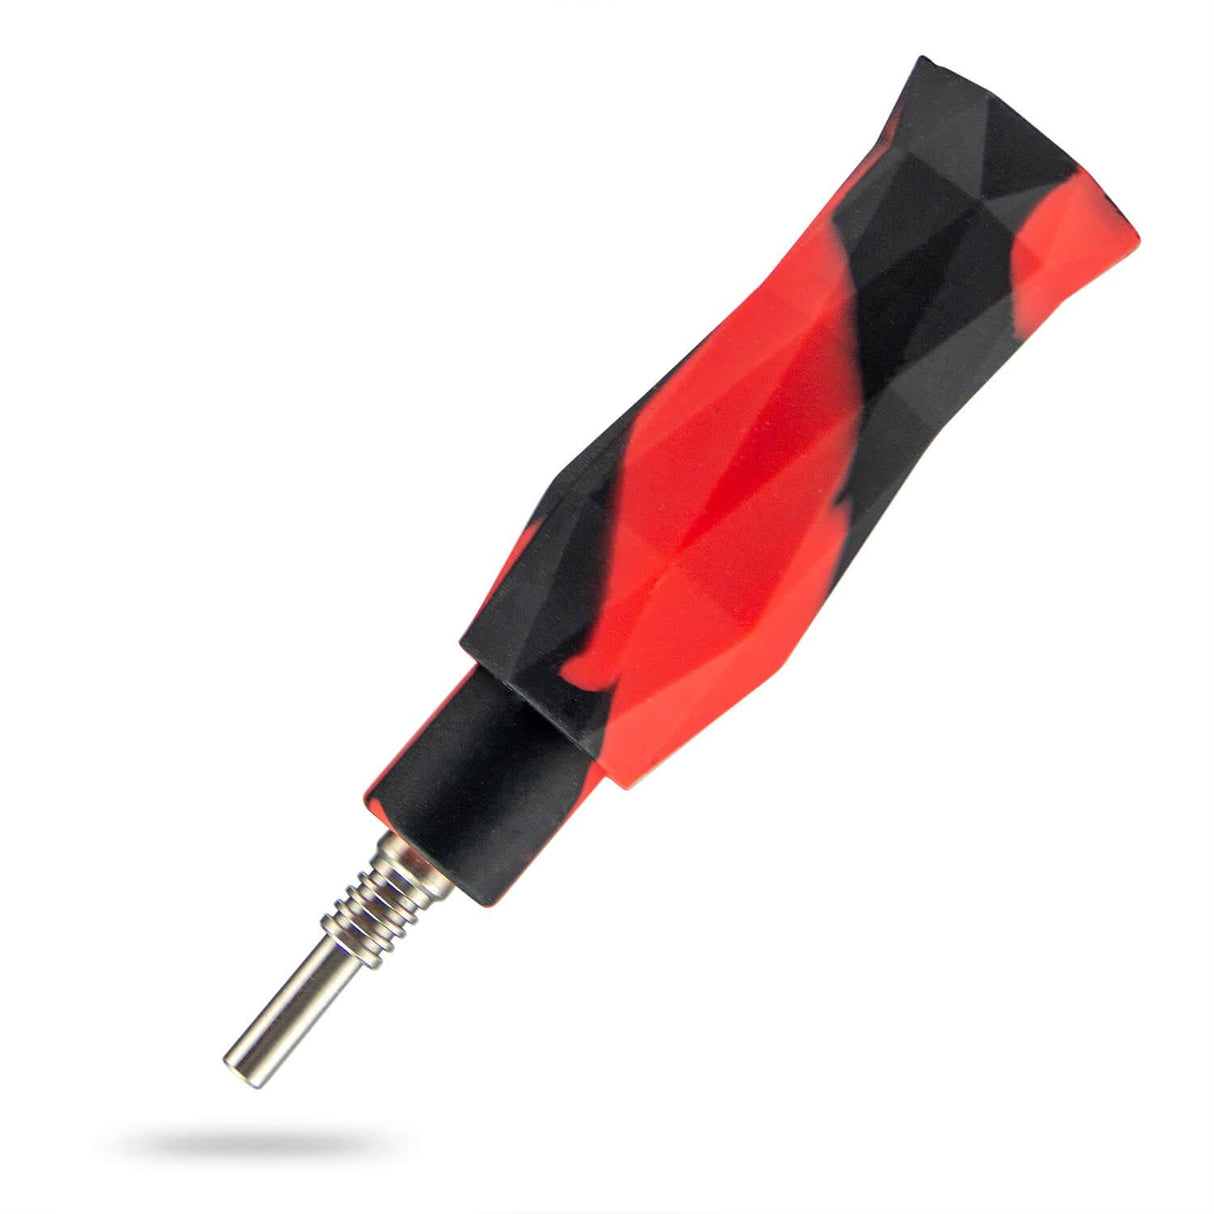 PILOT DIARY Silicone Nectar Collector Kit in Red and Black - Angled Side View